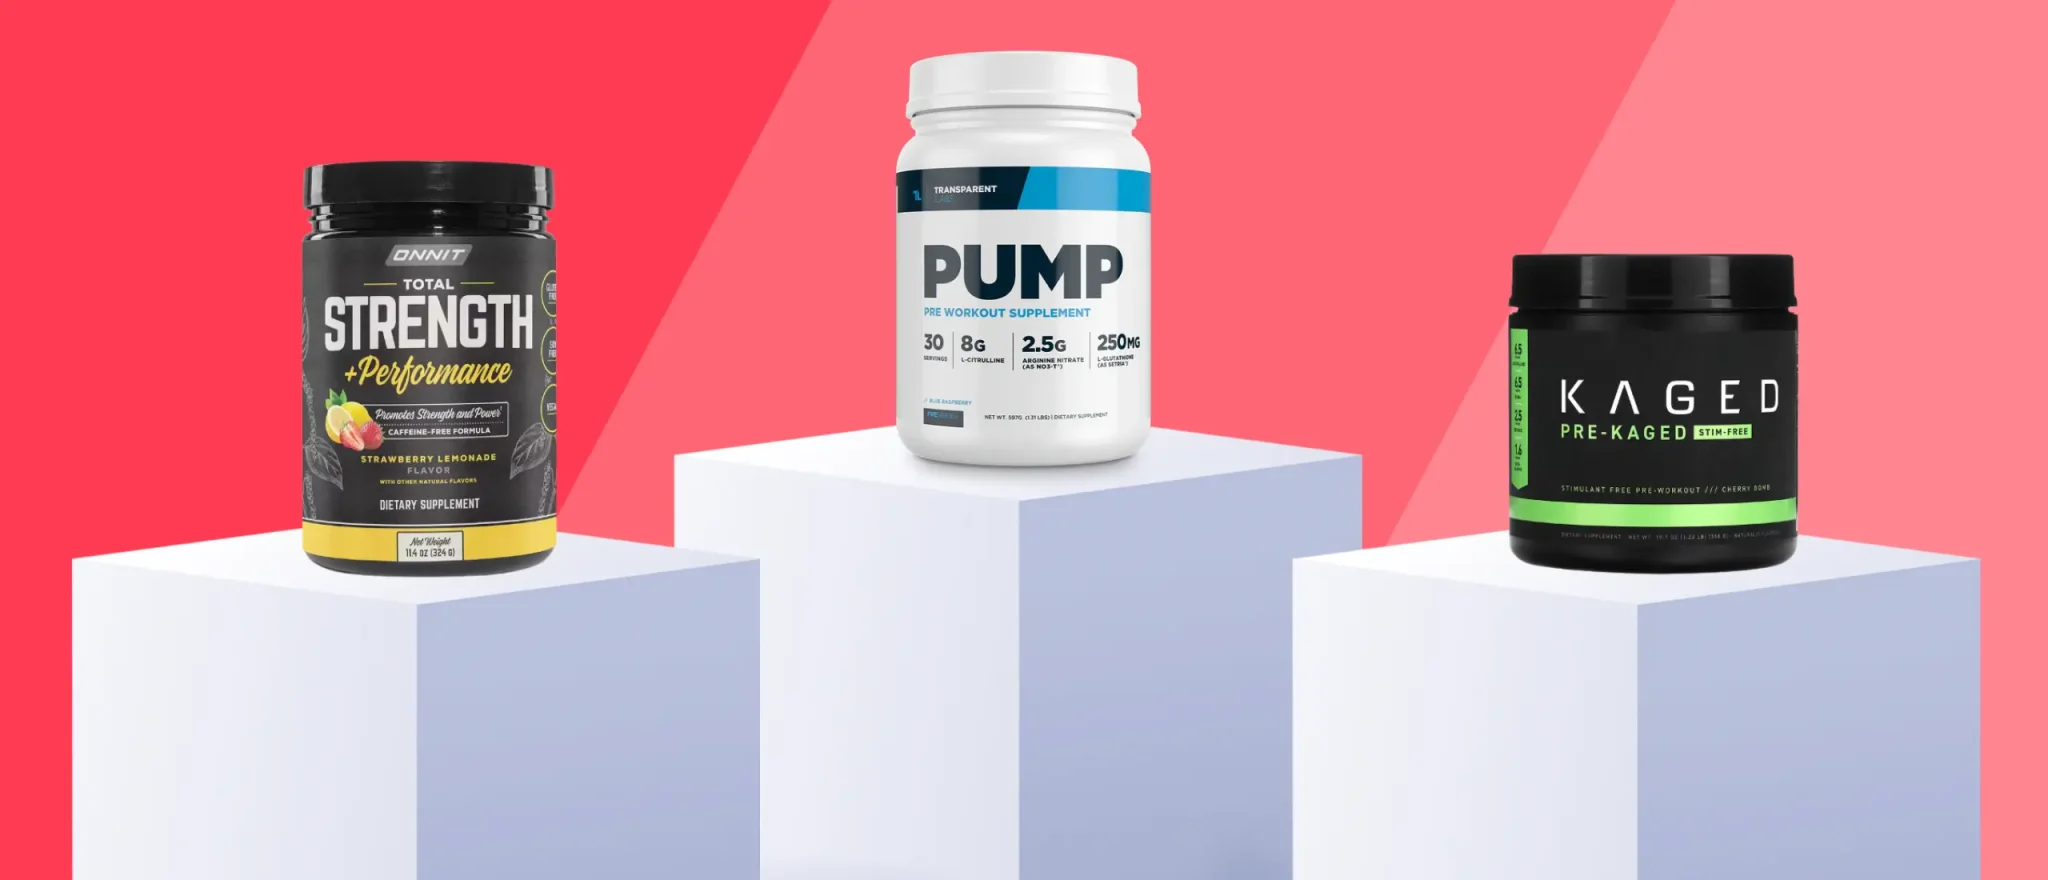 Want Performance Without the Jitters? Try a Non-Stim Pre-Workout